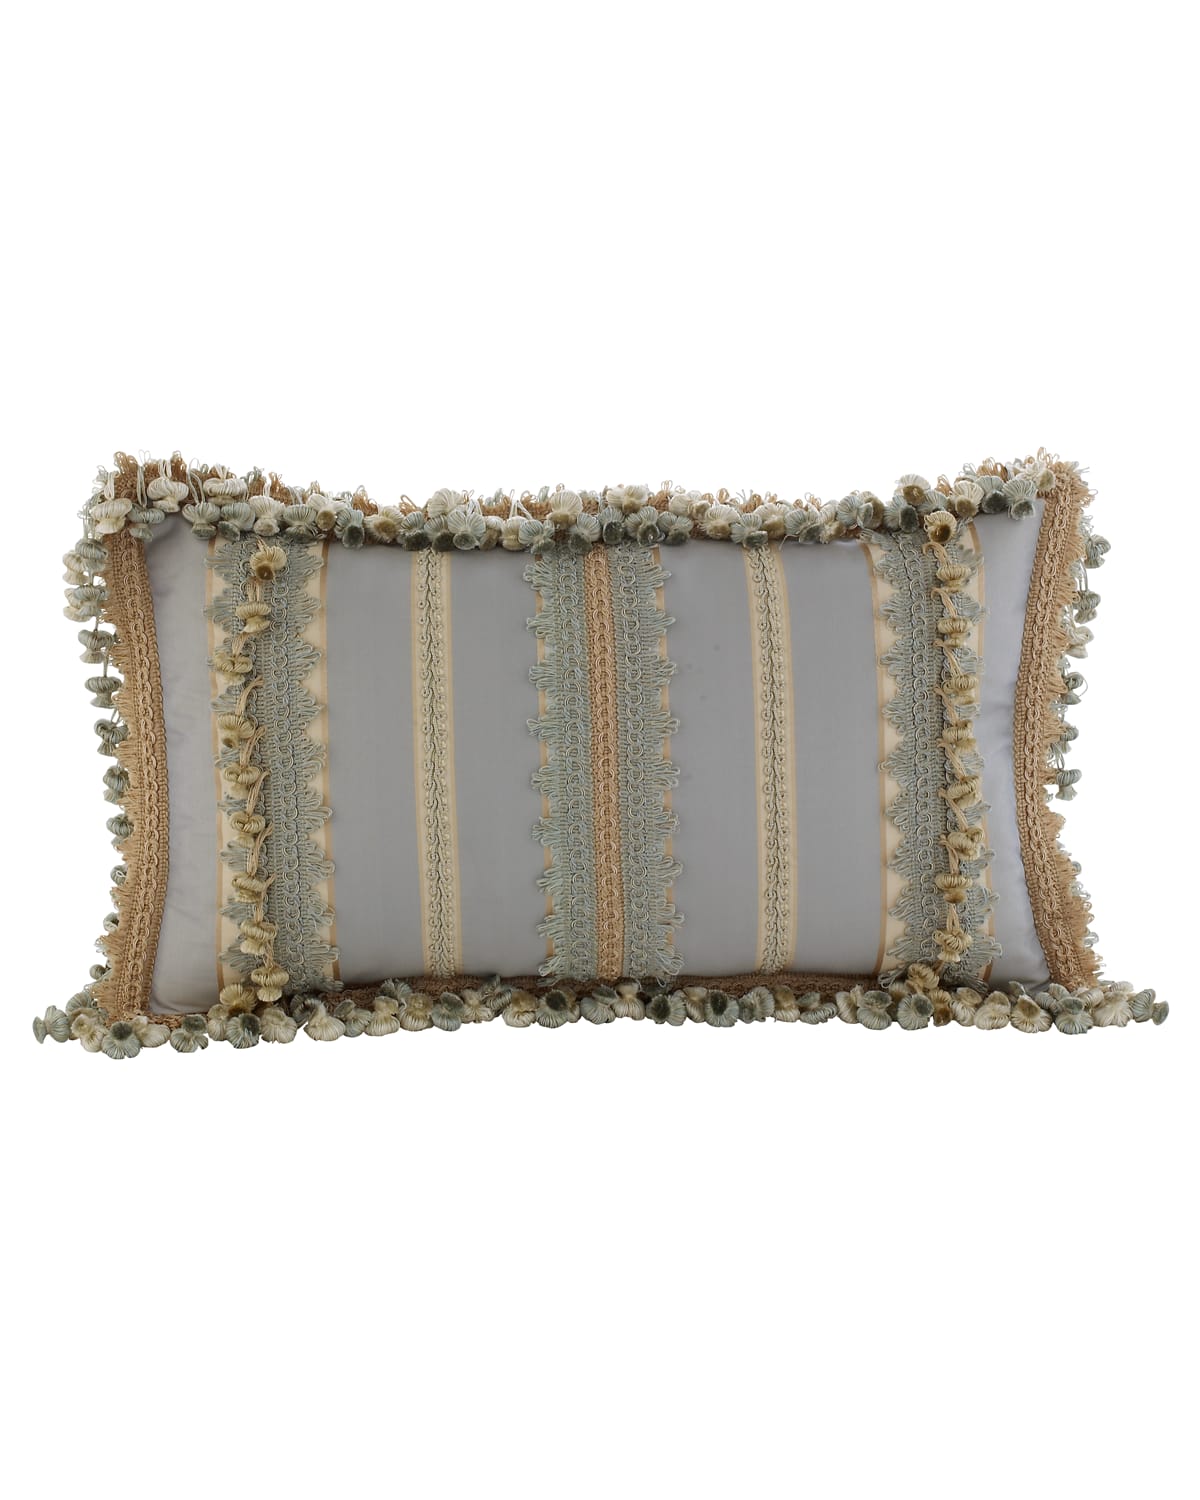 Image Sweet Dreams Crystal Palace Striped Pillow, 12" x 21"